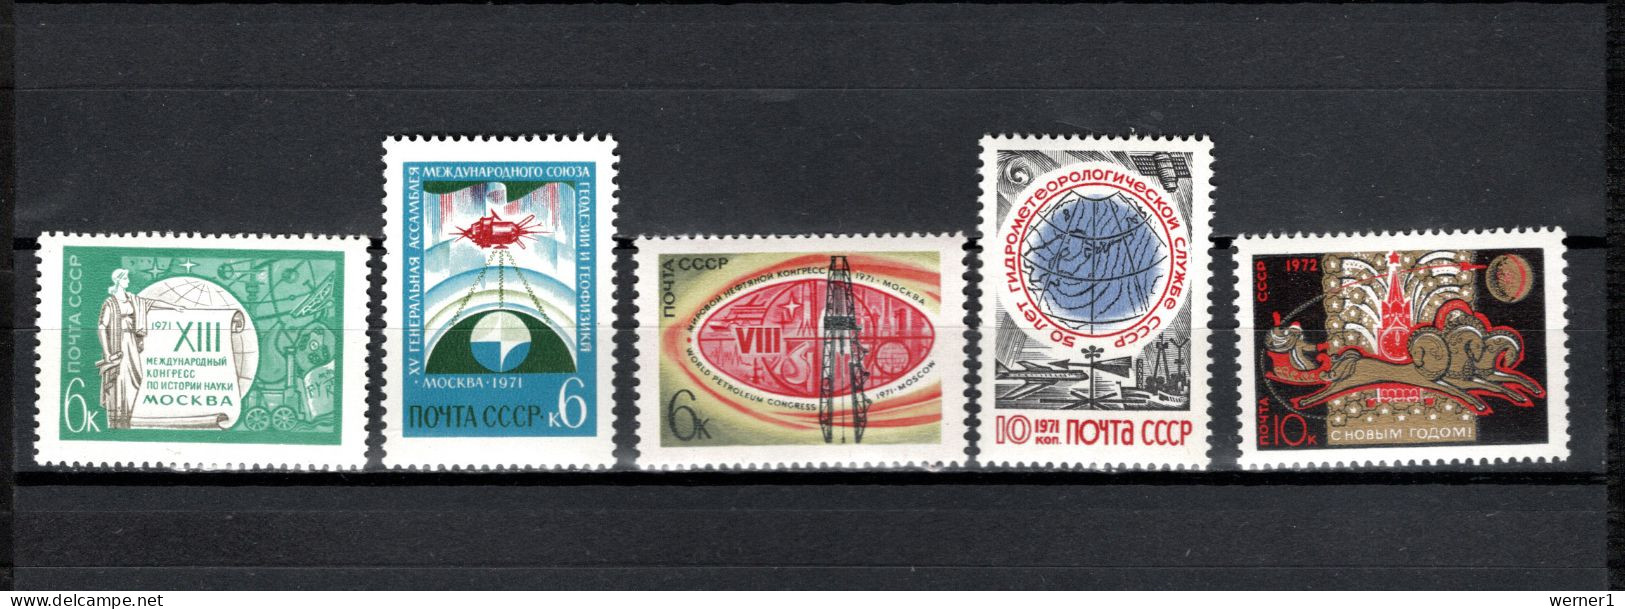 USSR Russia 1971 Space, International Congress Moscow, Meteorology, New Year 5 Stamps MNH - Russie & URSS